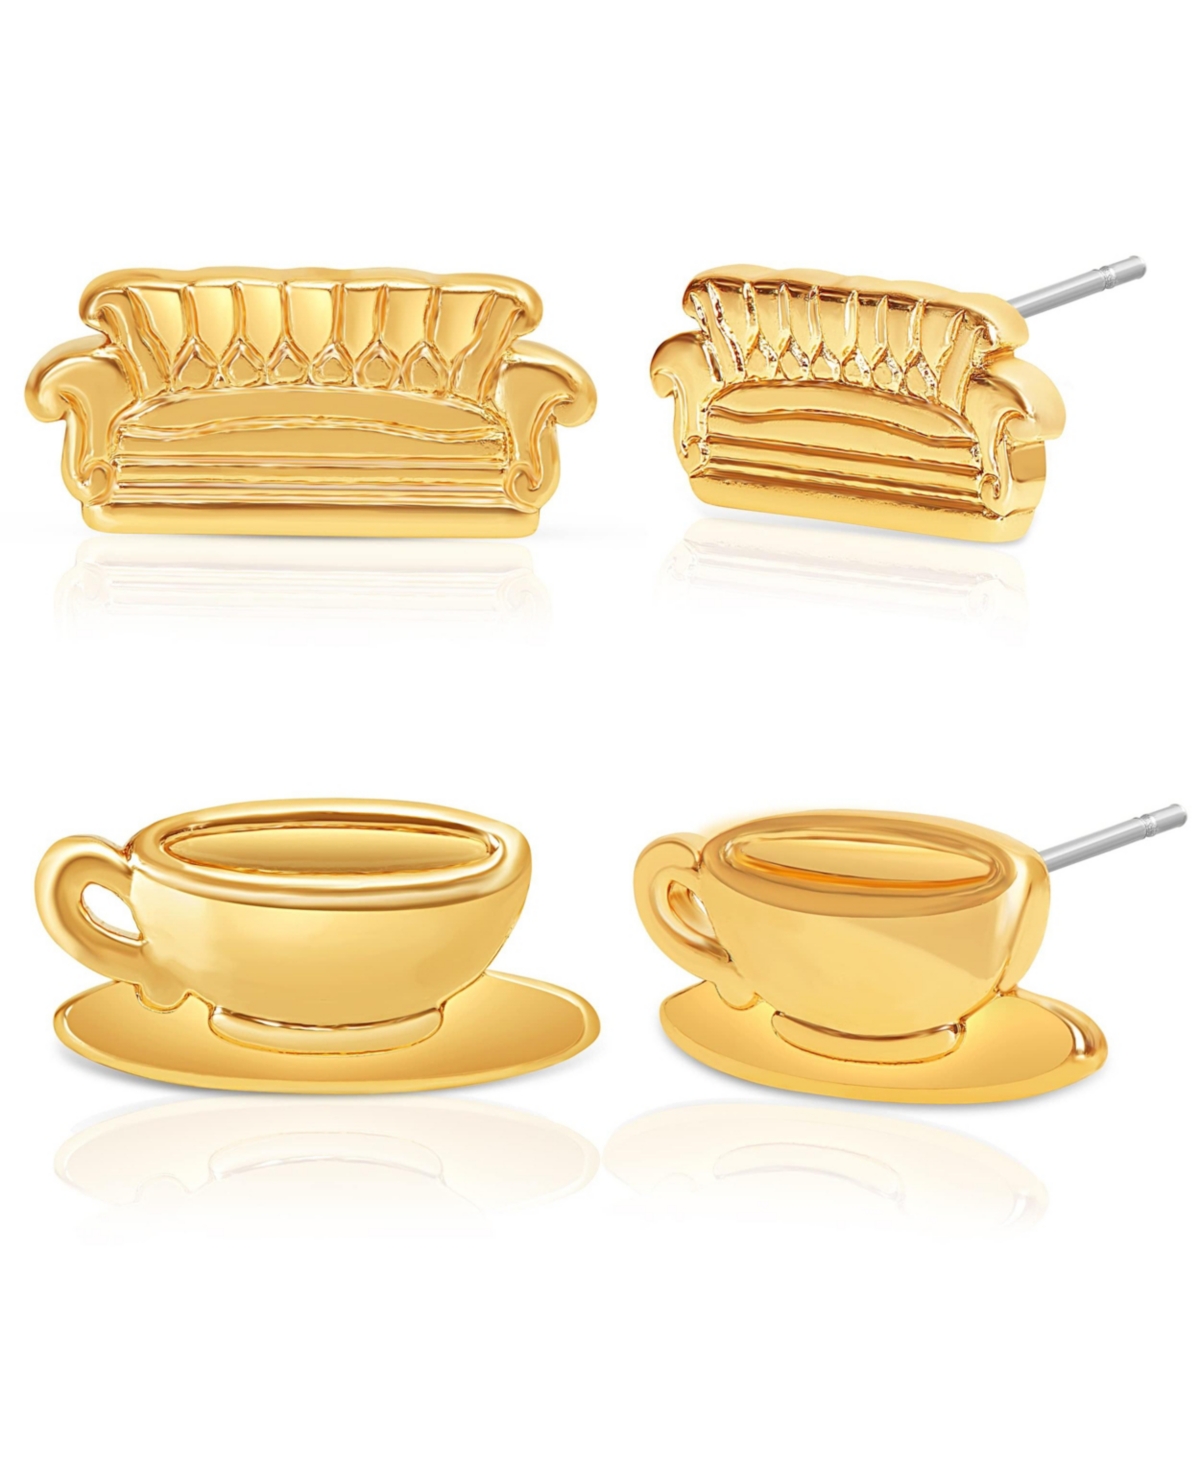 Tv Show Stud Earring Set - Central Perk Sofa and Coffee Cup - 2 Pairs - Gold tone